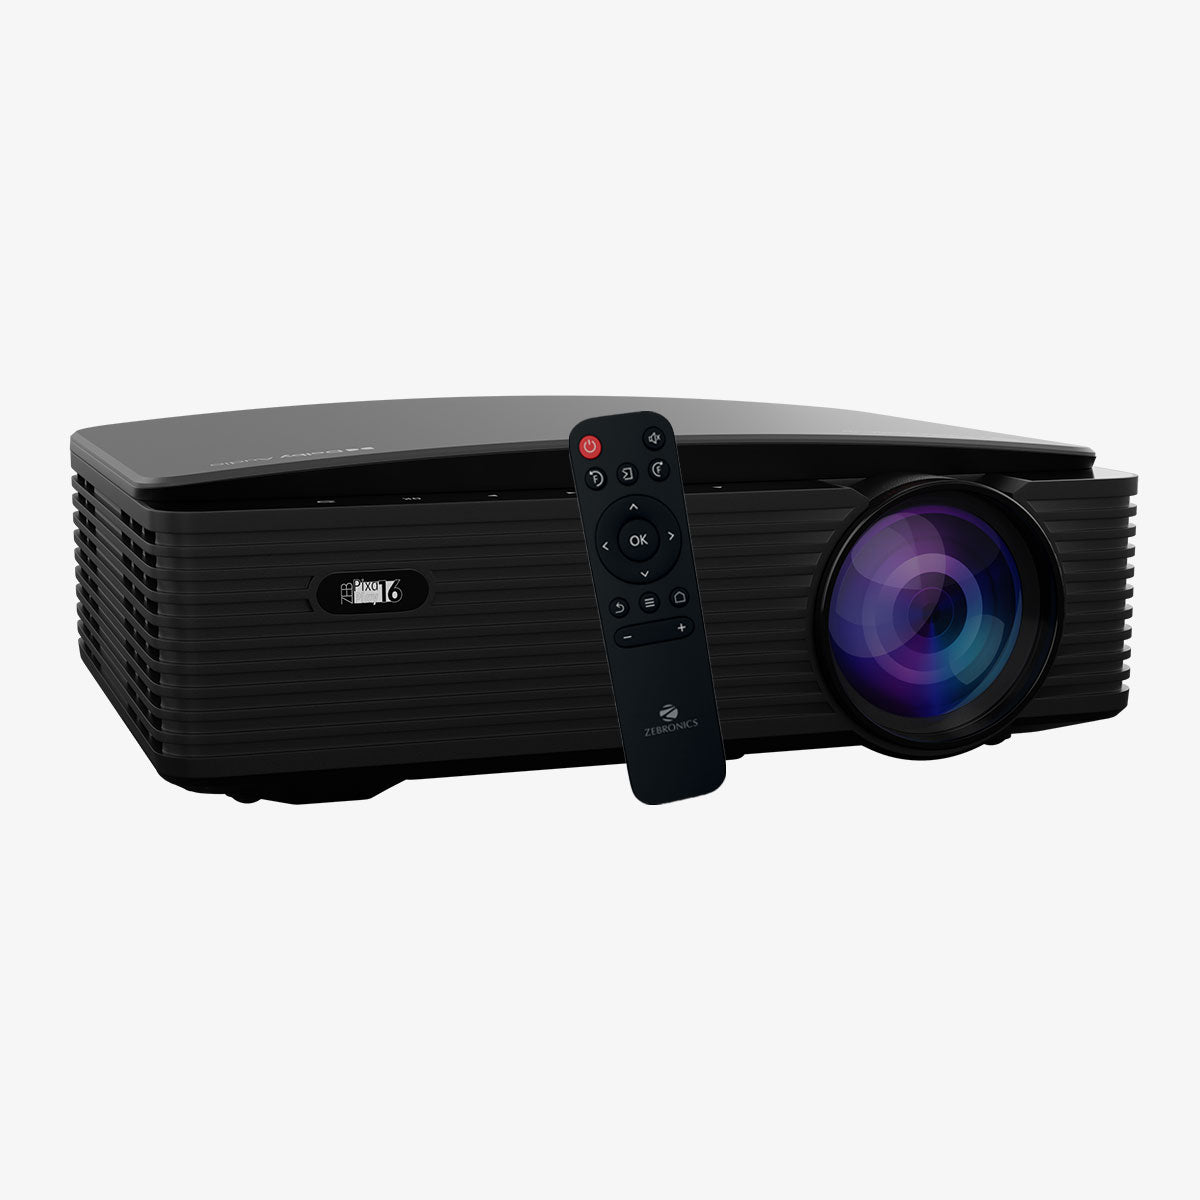 PixaPlay 16 LED Projector